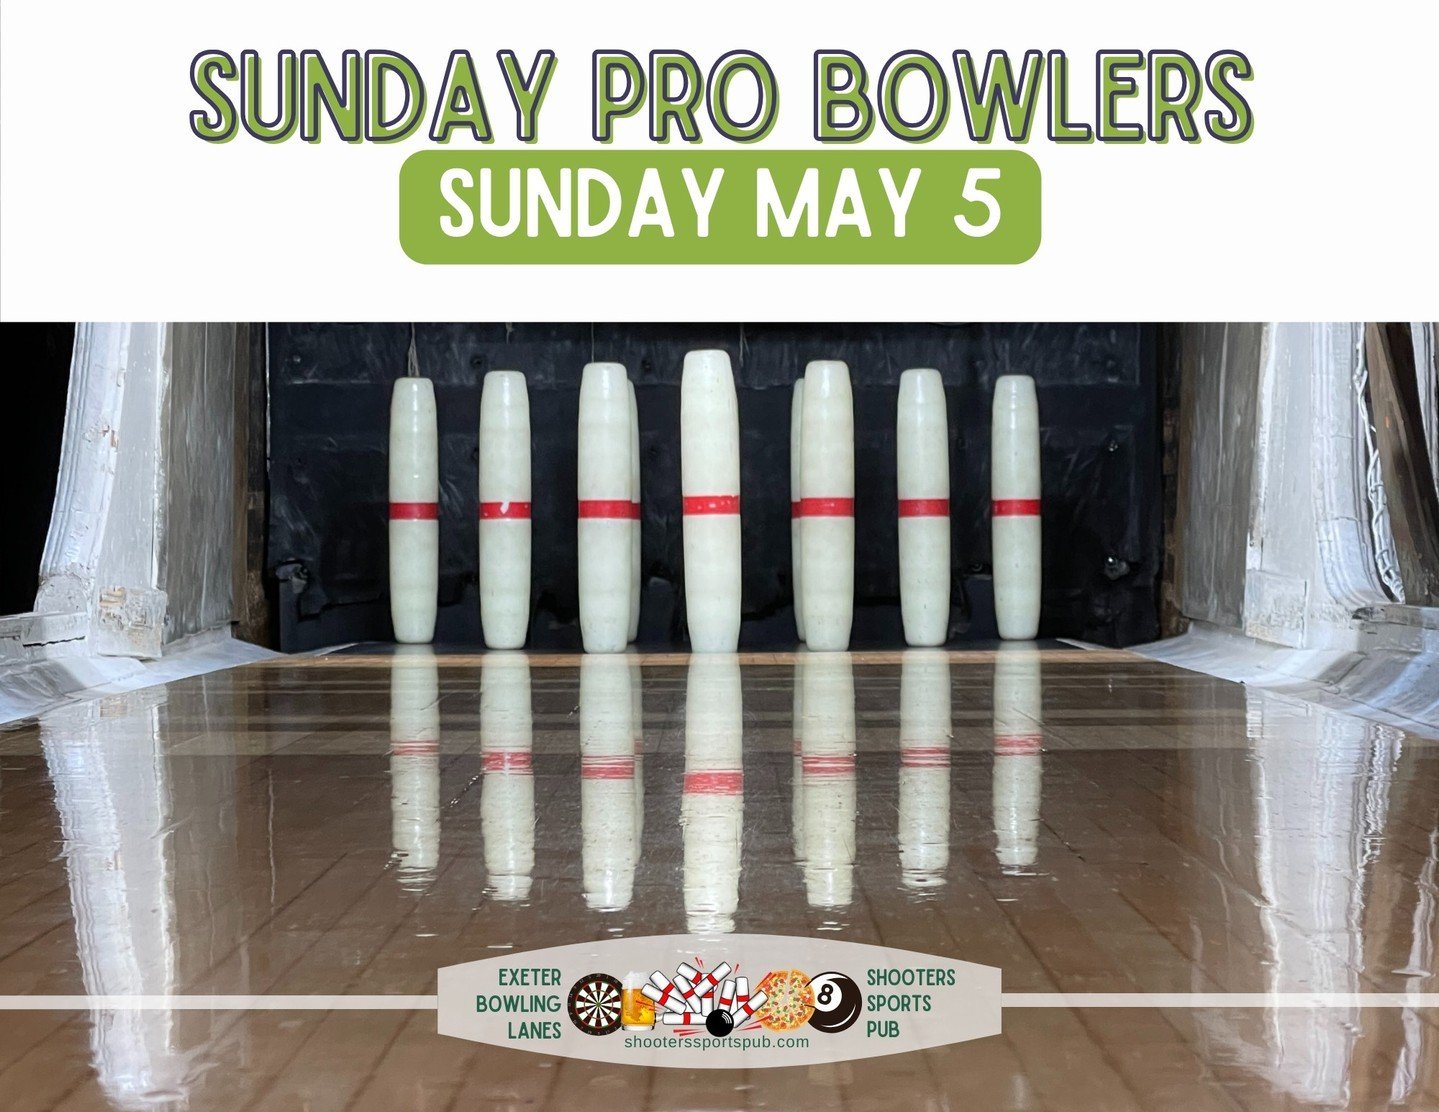 This weekend in the lanes!⁠
⁠
💥Friday: Welcome to the weekend⁠
Open bowling 10 am - 10 pm (No Cosmic Bowl today)⁠
⁠
💥Saturday: Last day of the Championship⁠
Open Cosmic Bowl 5 pm - 10 pm⁠
⁠
💥Sunday: Pro League finals⁠
Open bowling 4 pm - Close